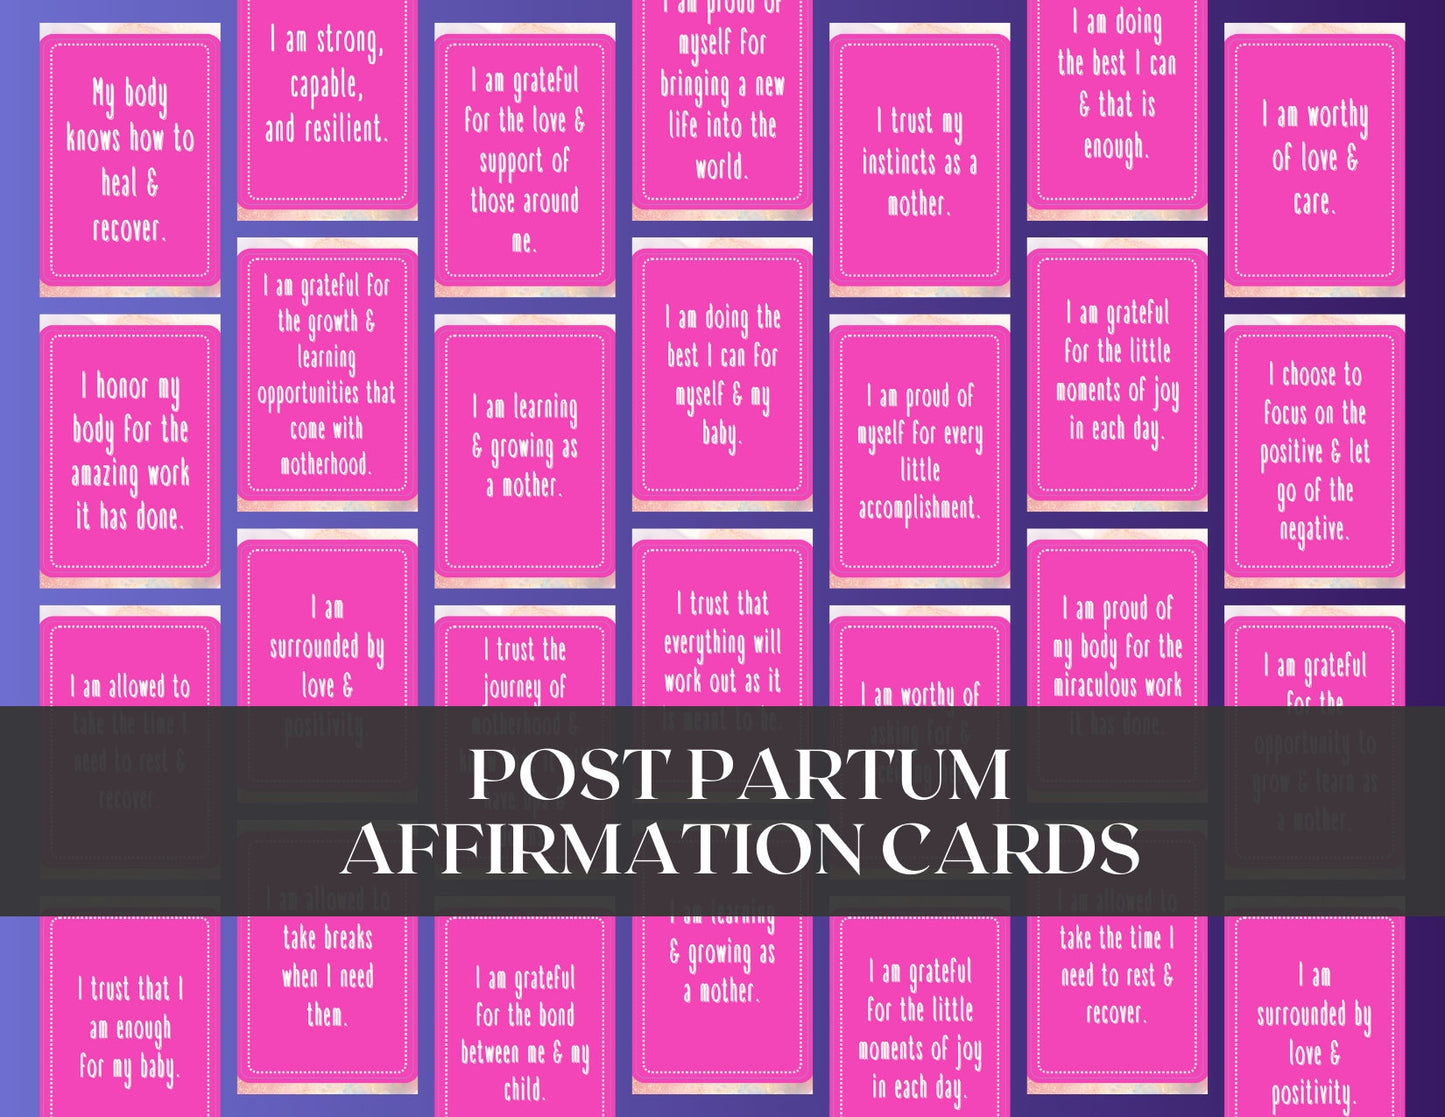 PLR Pregnancy Planner & 275 Post Partum Affirmation Cards Bundle - Private Label Rights - White Label - Resell for 100% Profit